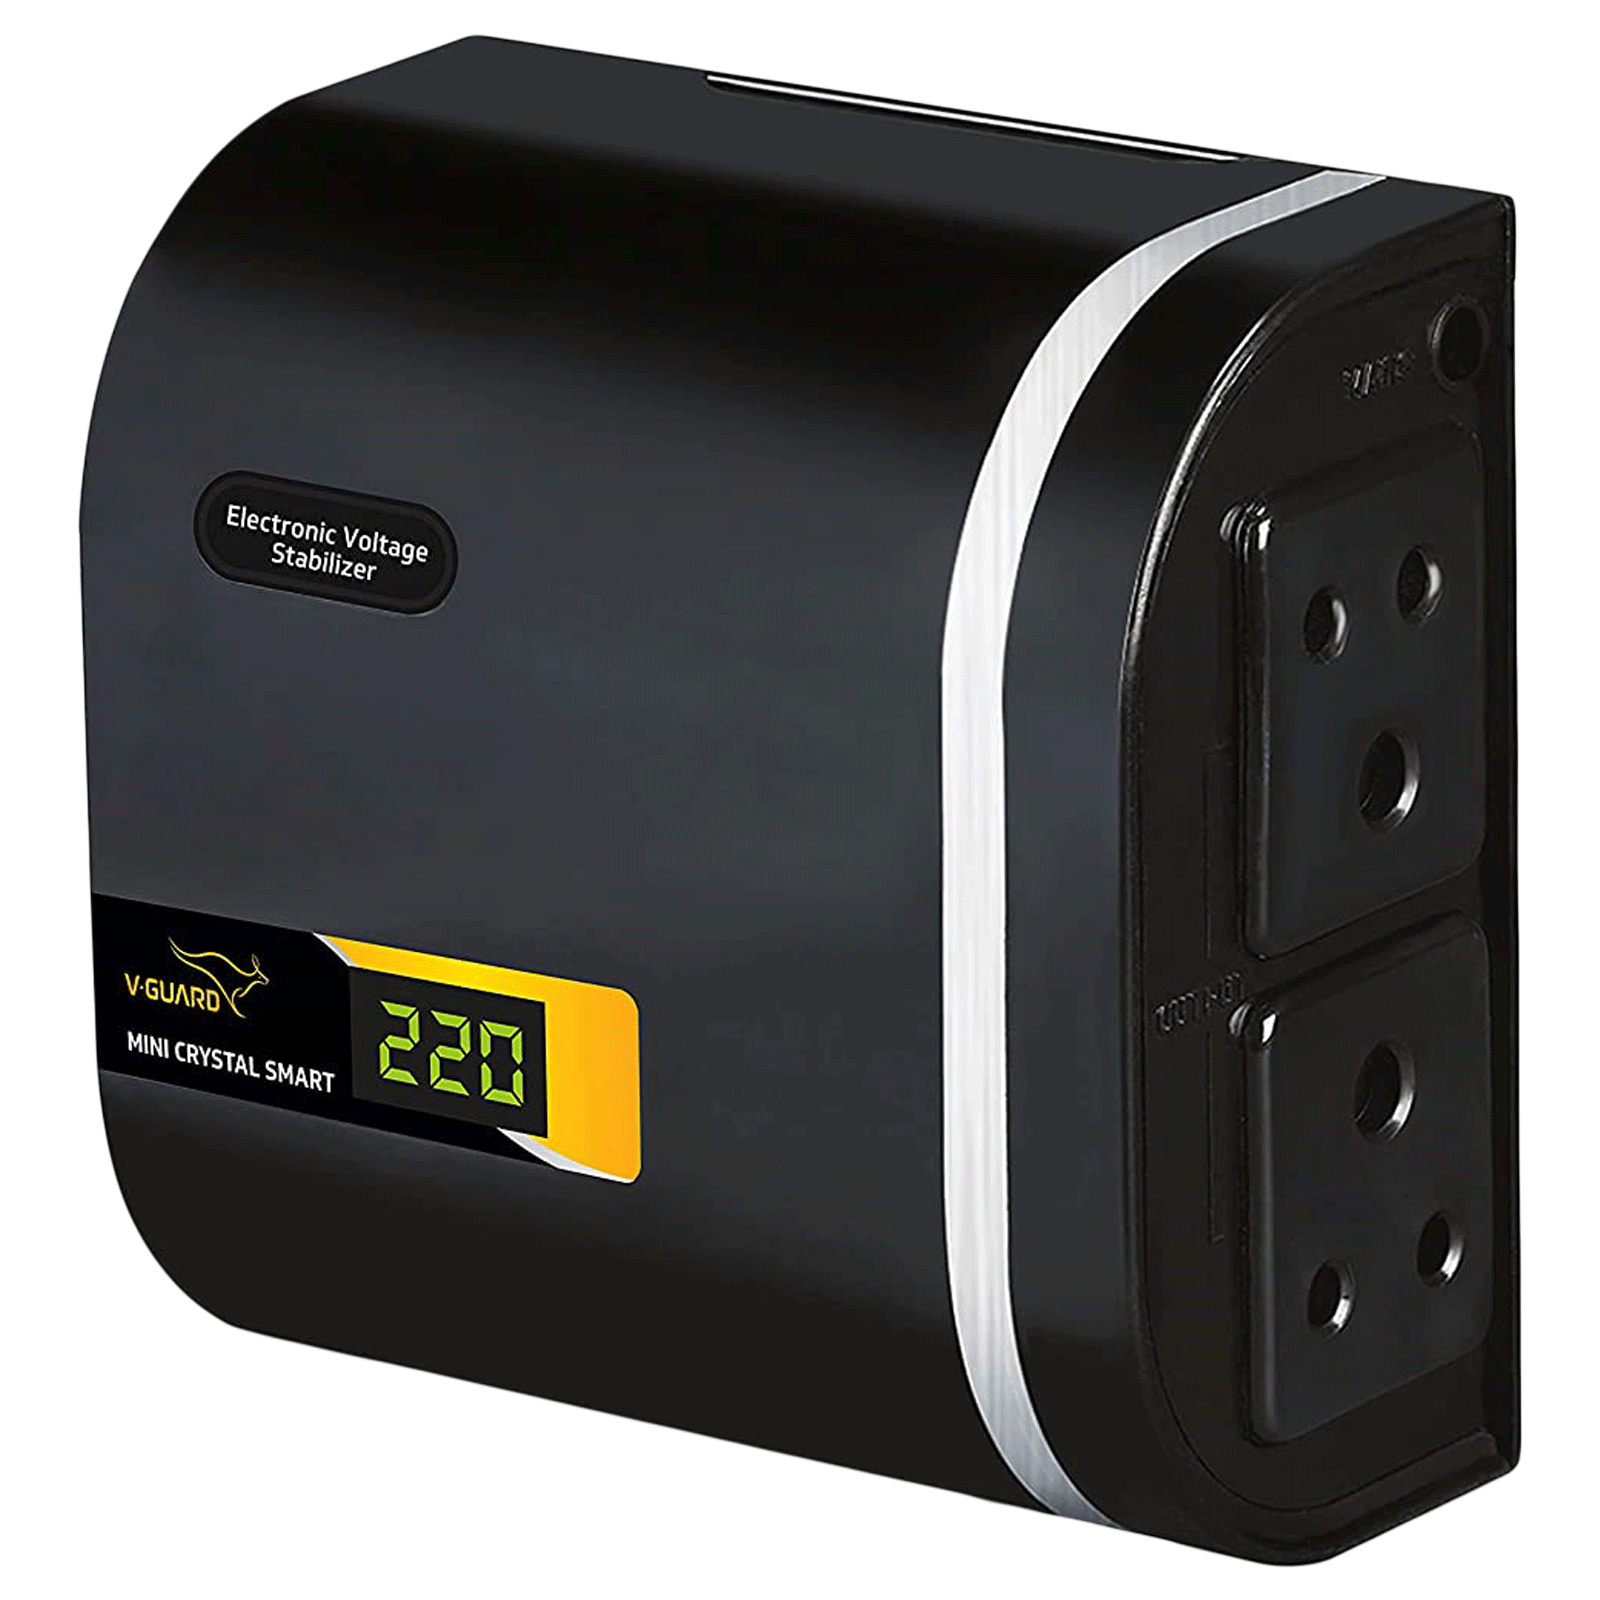 V-Guard Mini Crystal Smart 1.3 Amps Voltage Stabilizer For 32 Inch Television (90-290VAC, Short Circuit Protection, Black)_1